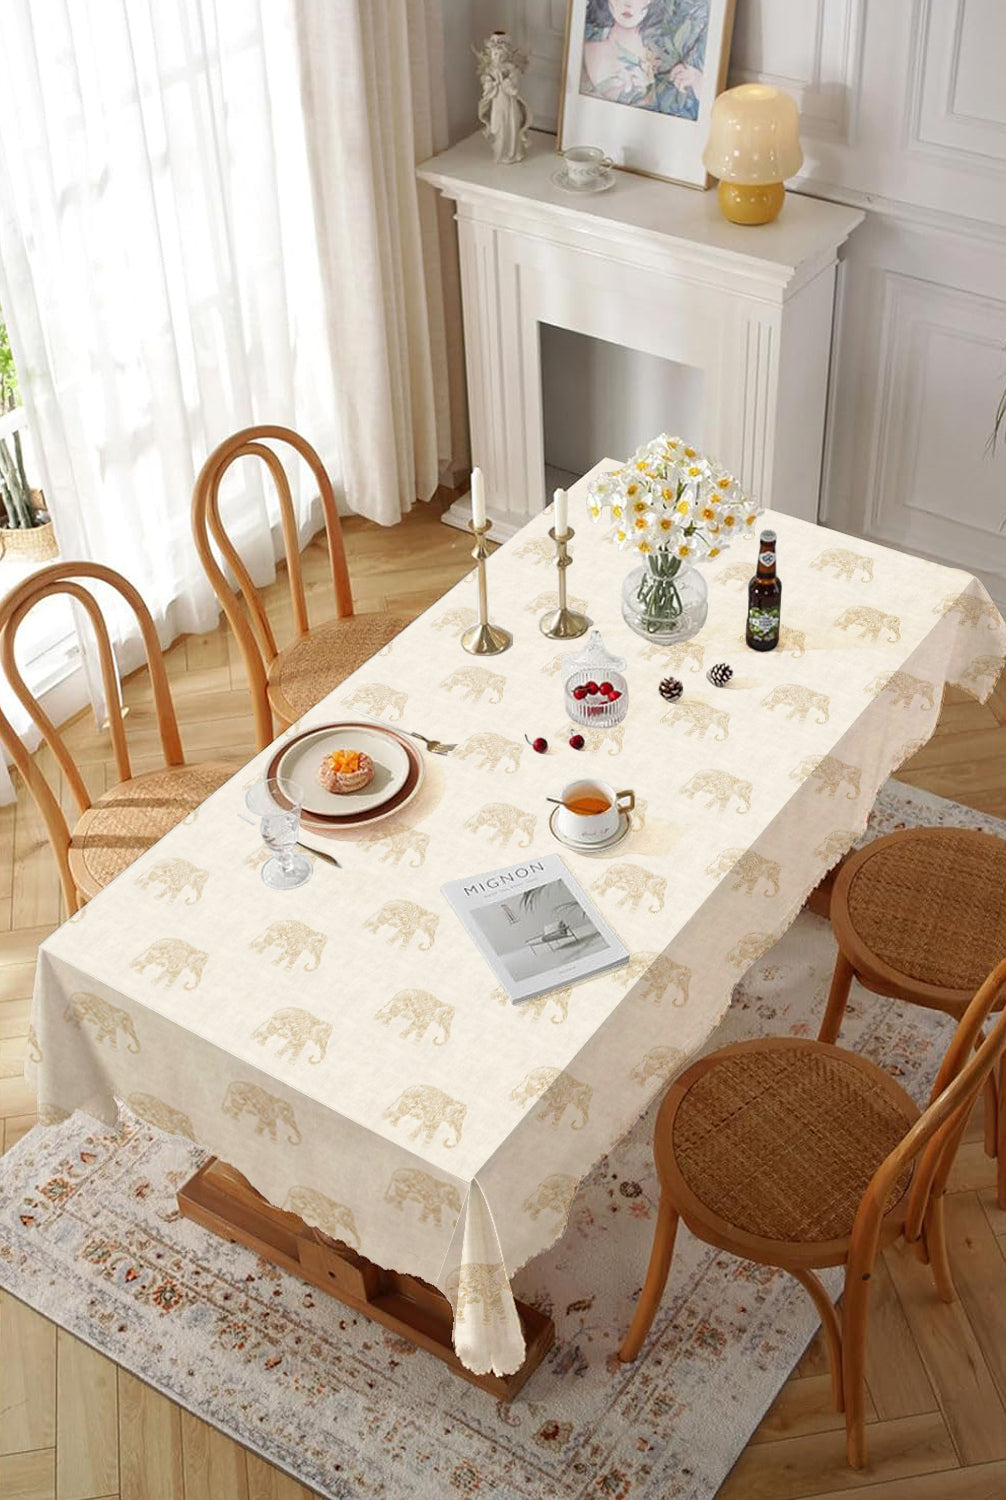 Jodhpur Elephant 6 Seater Table Cloth Biscuit